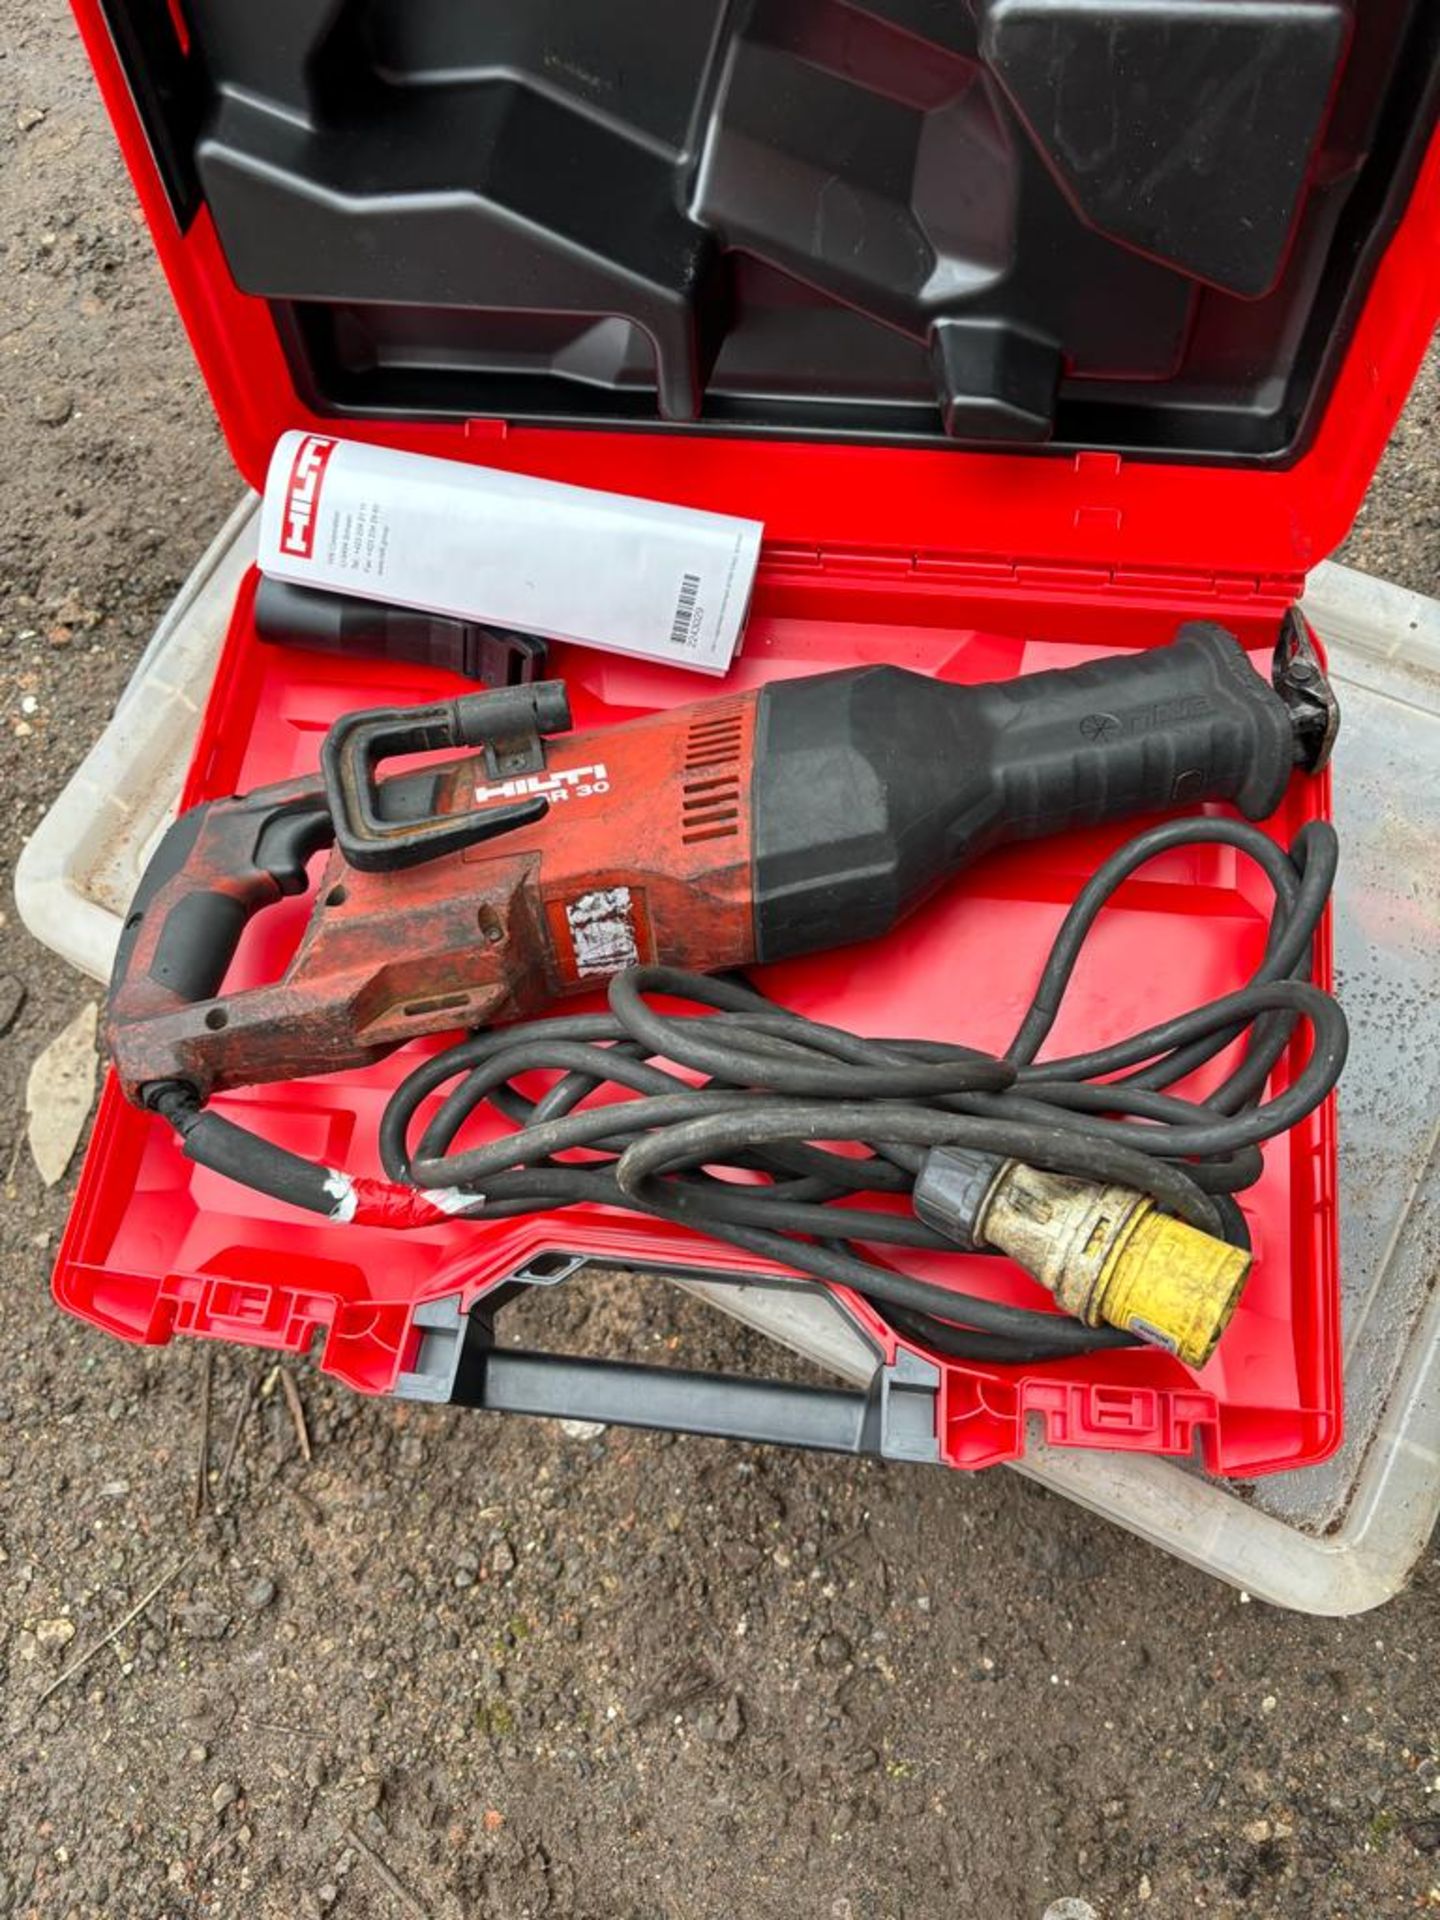 Hilti Portable Electric Reciprocating Saw, in case, 110v Please read the following important notes:-